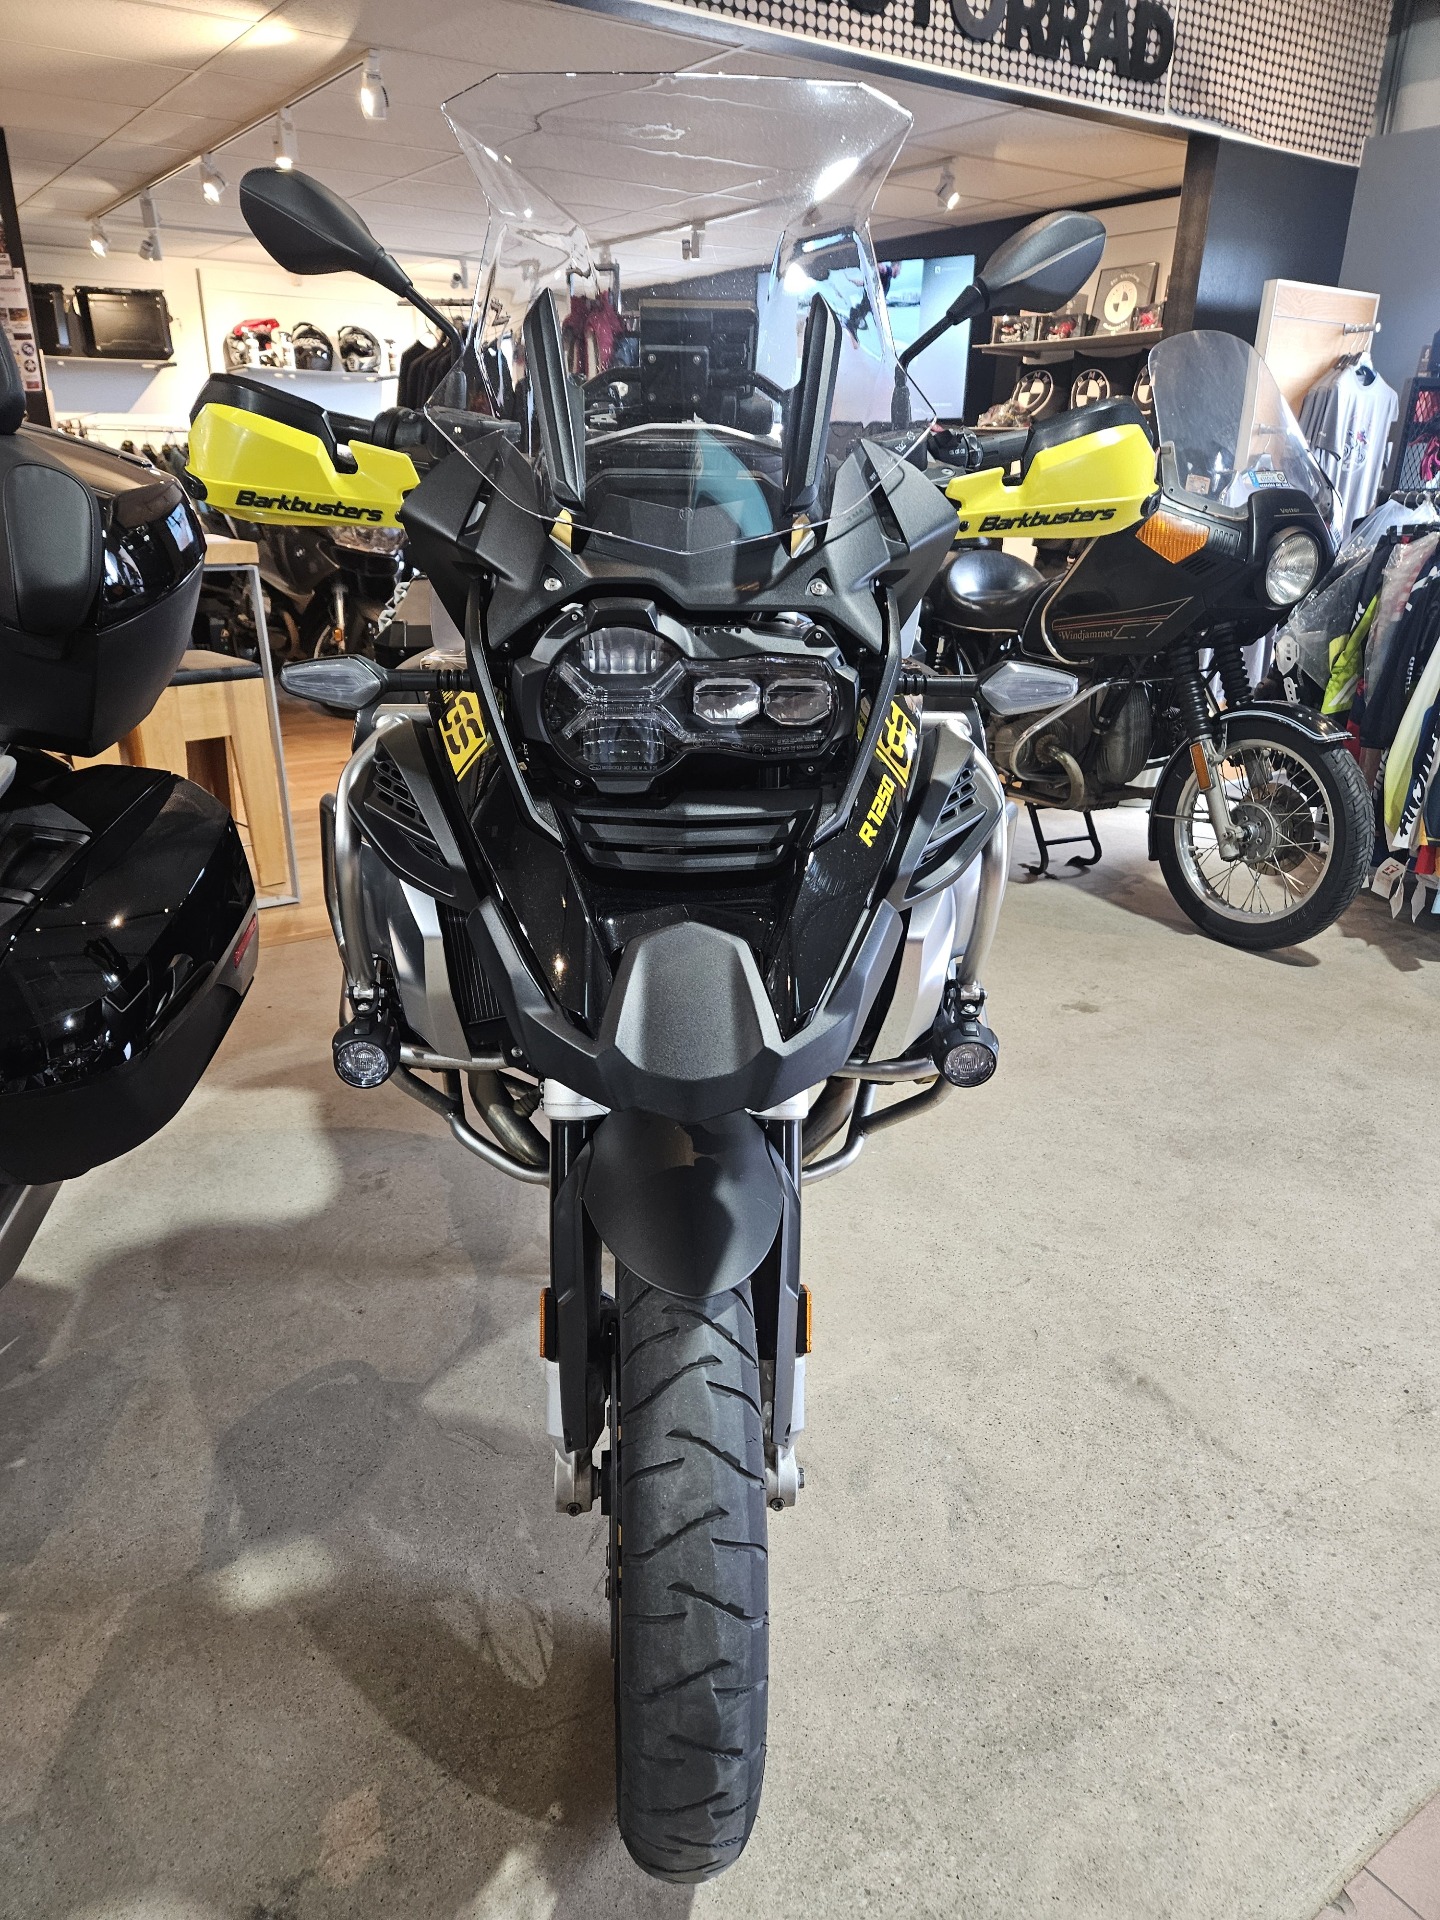 2021 BMW R 1250 GS Adventure - 40 Years of GS Edition in Sioux City, Iowa - Photo 1